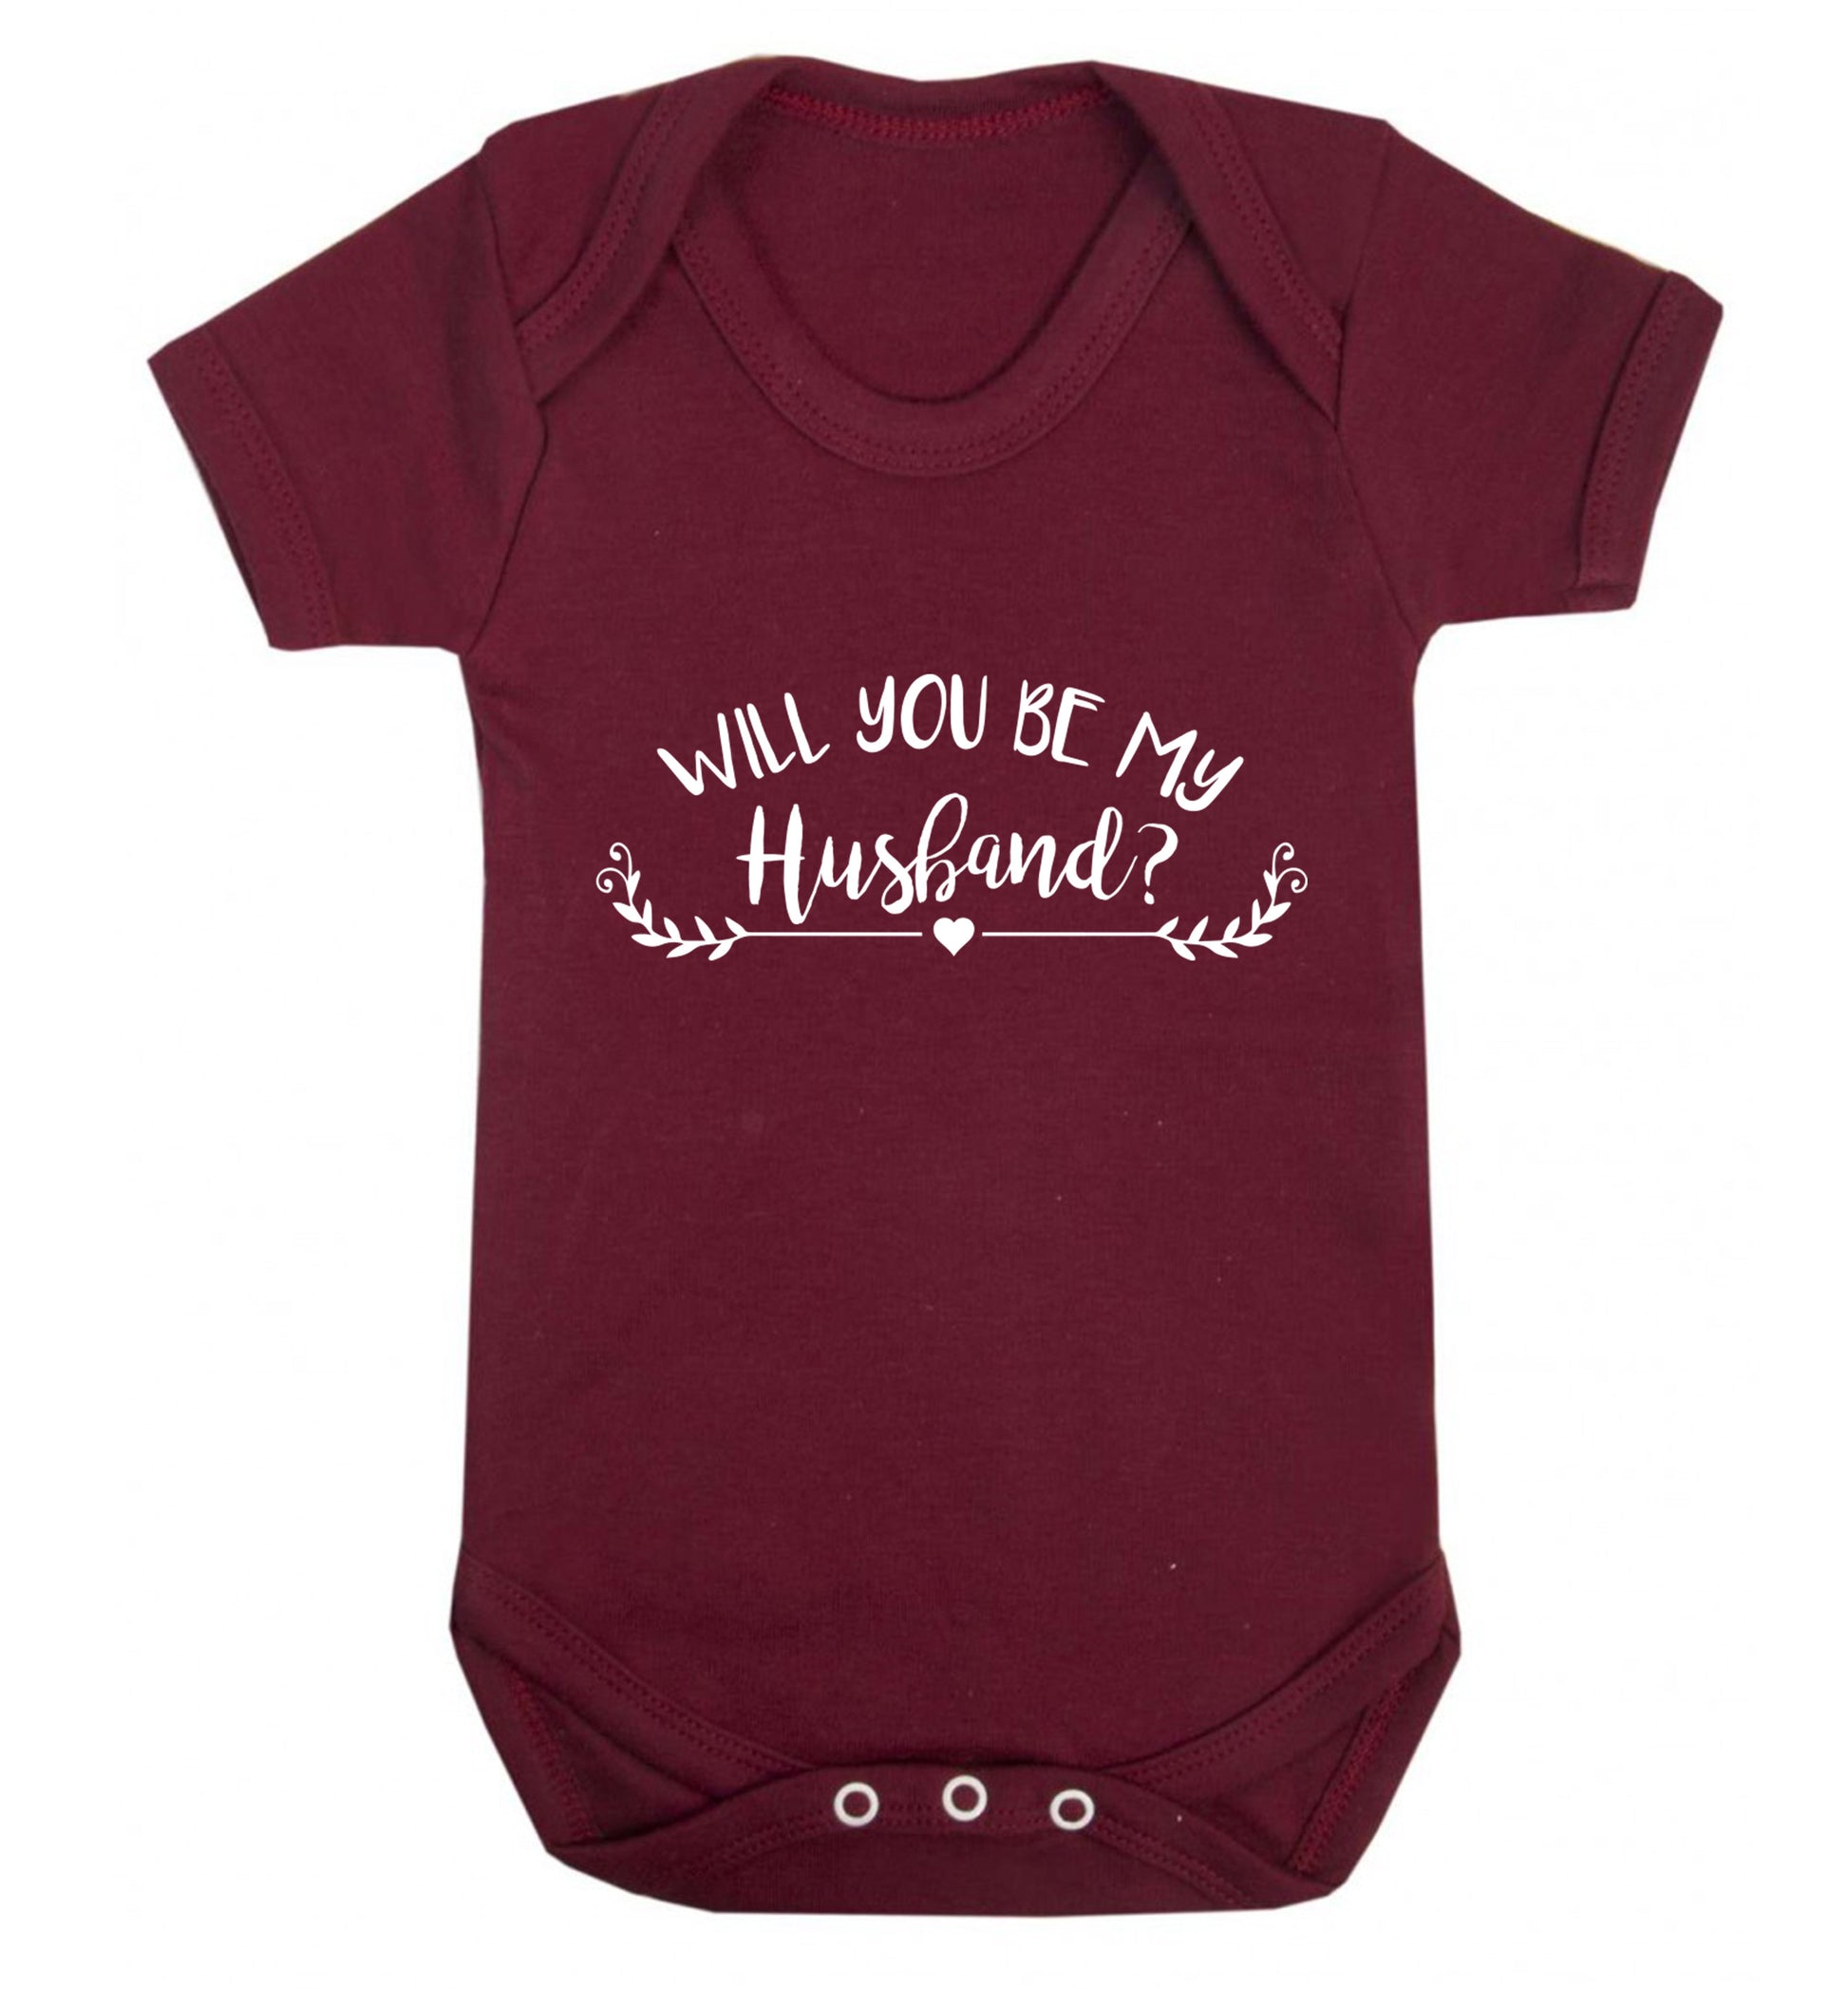 Will you be my husband? Baby Vest maroon 18-24 months